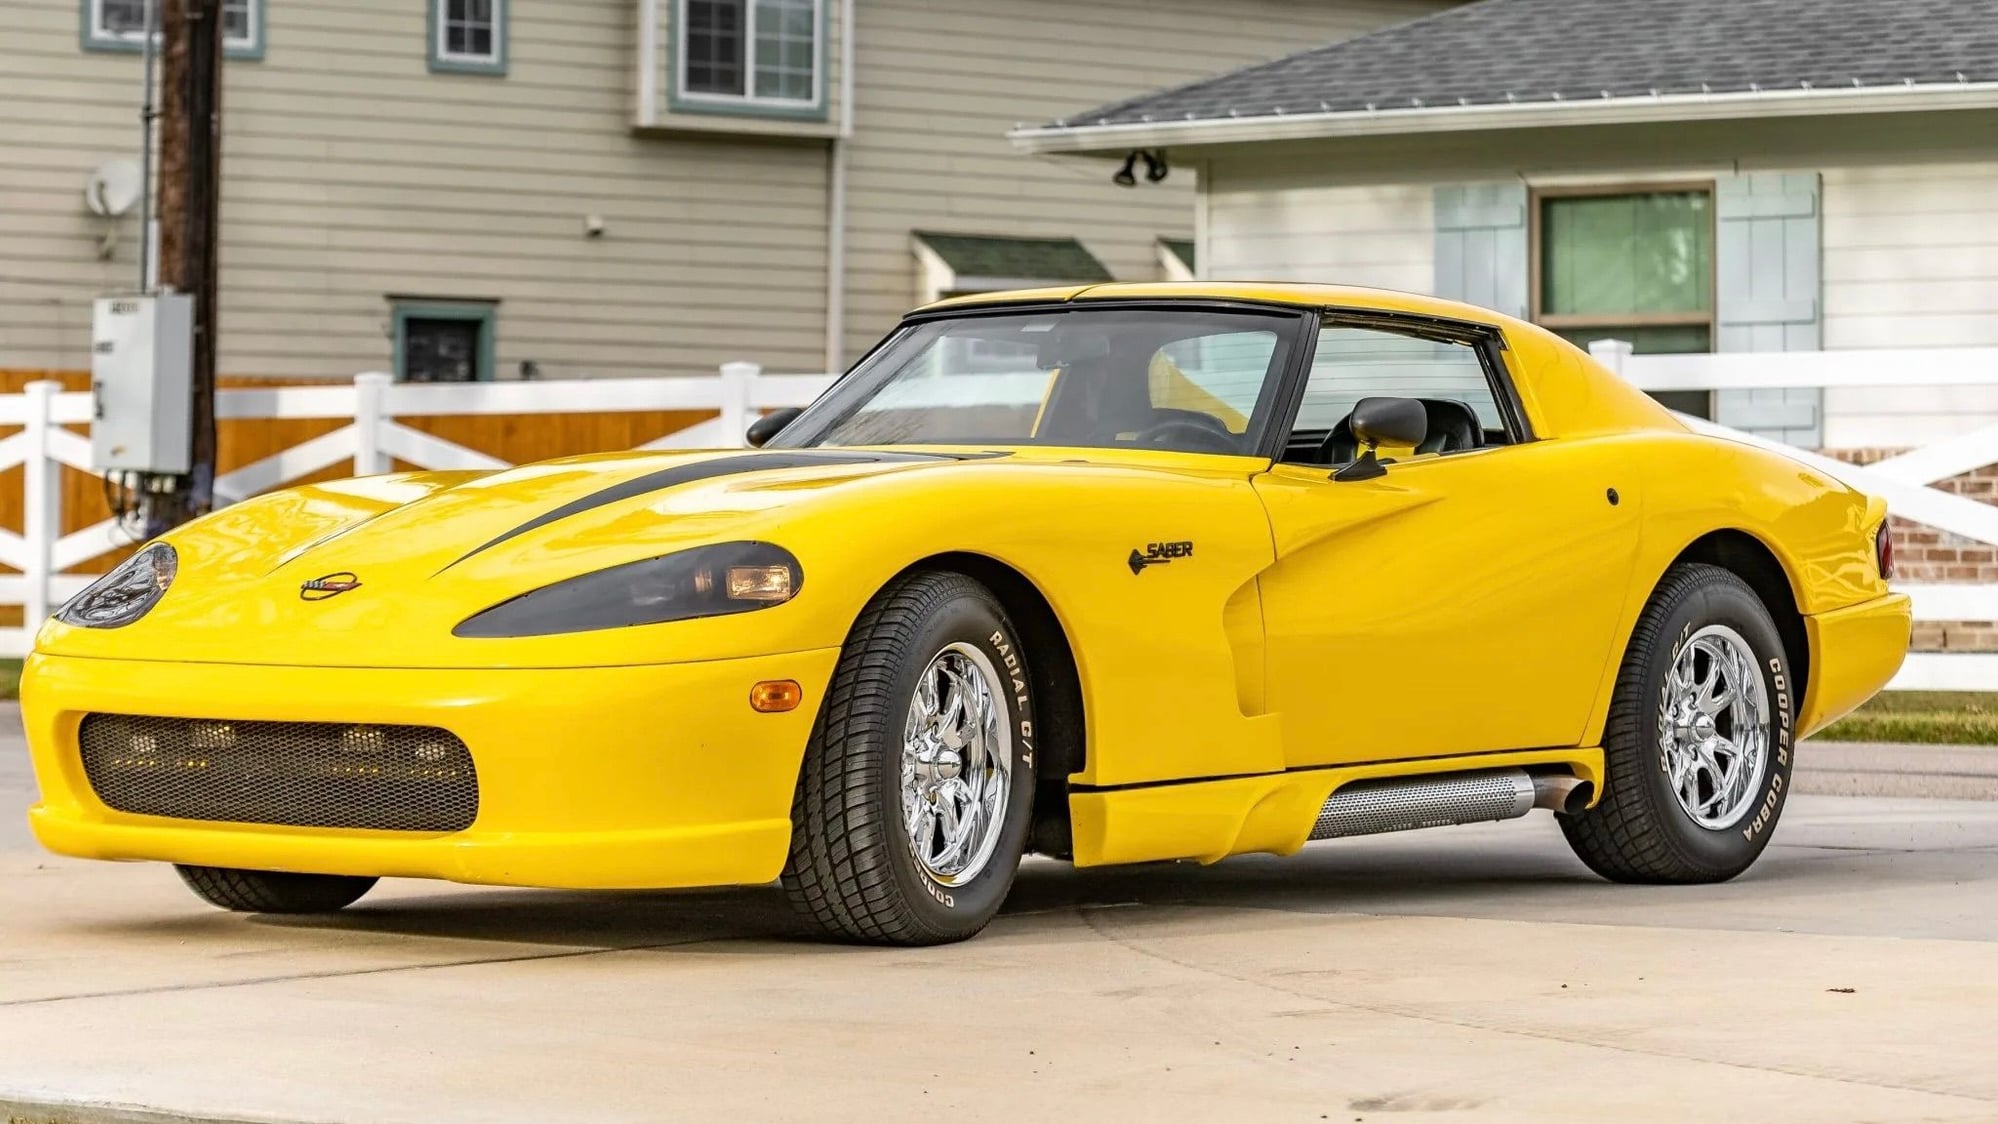 C3 Corvette With Viper Body Is the Strangest Thing We've Seen